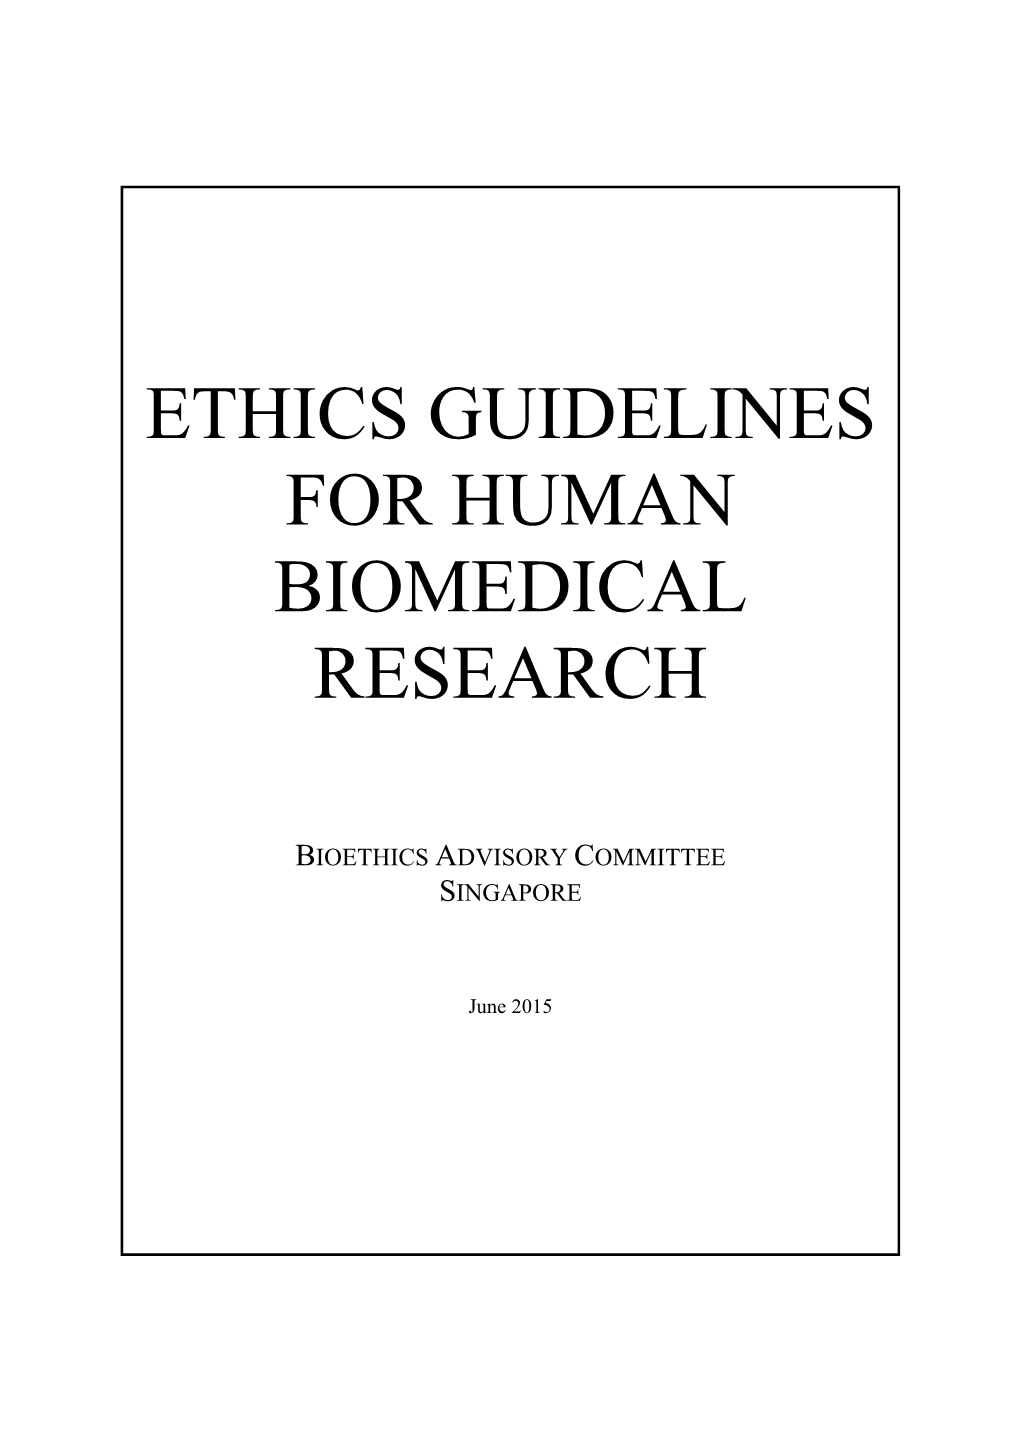 Ethics Guidelines for Human Biomedical Research